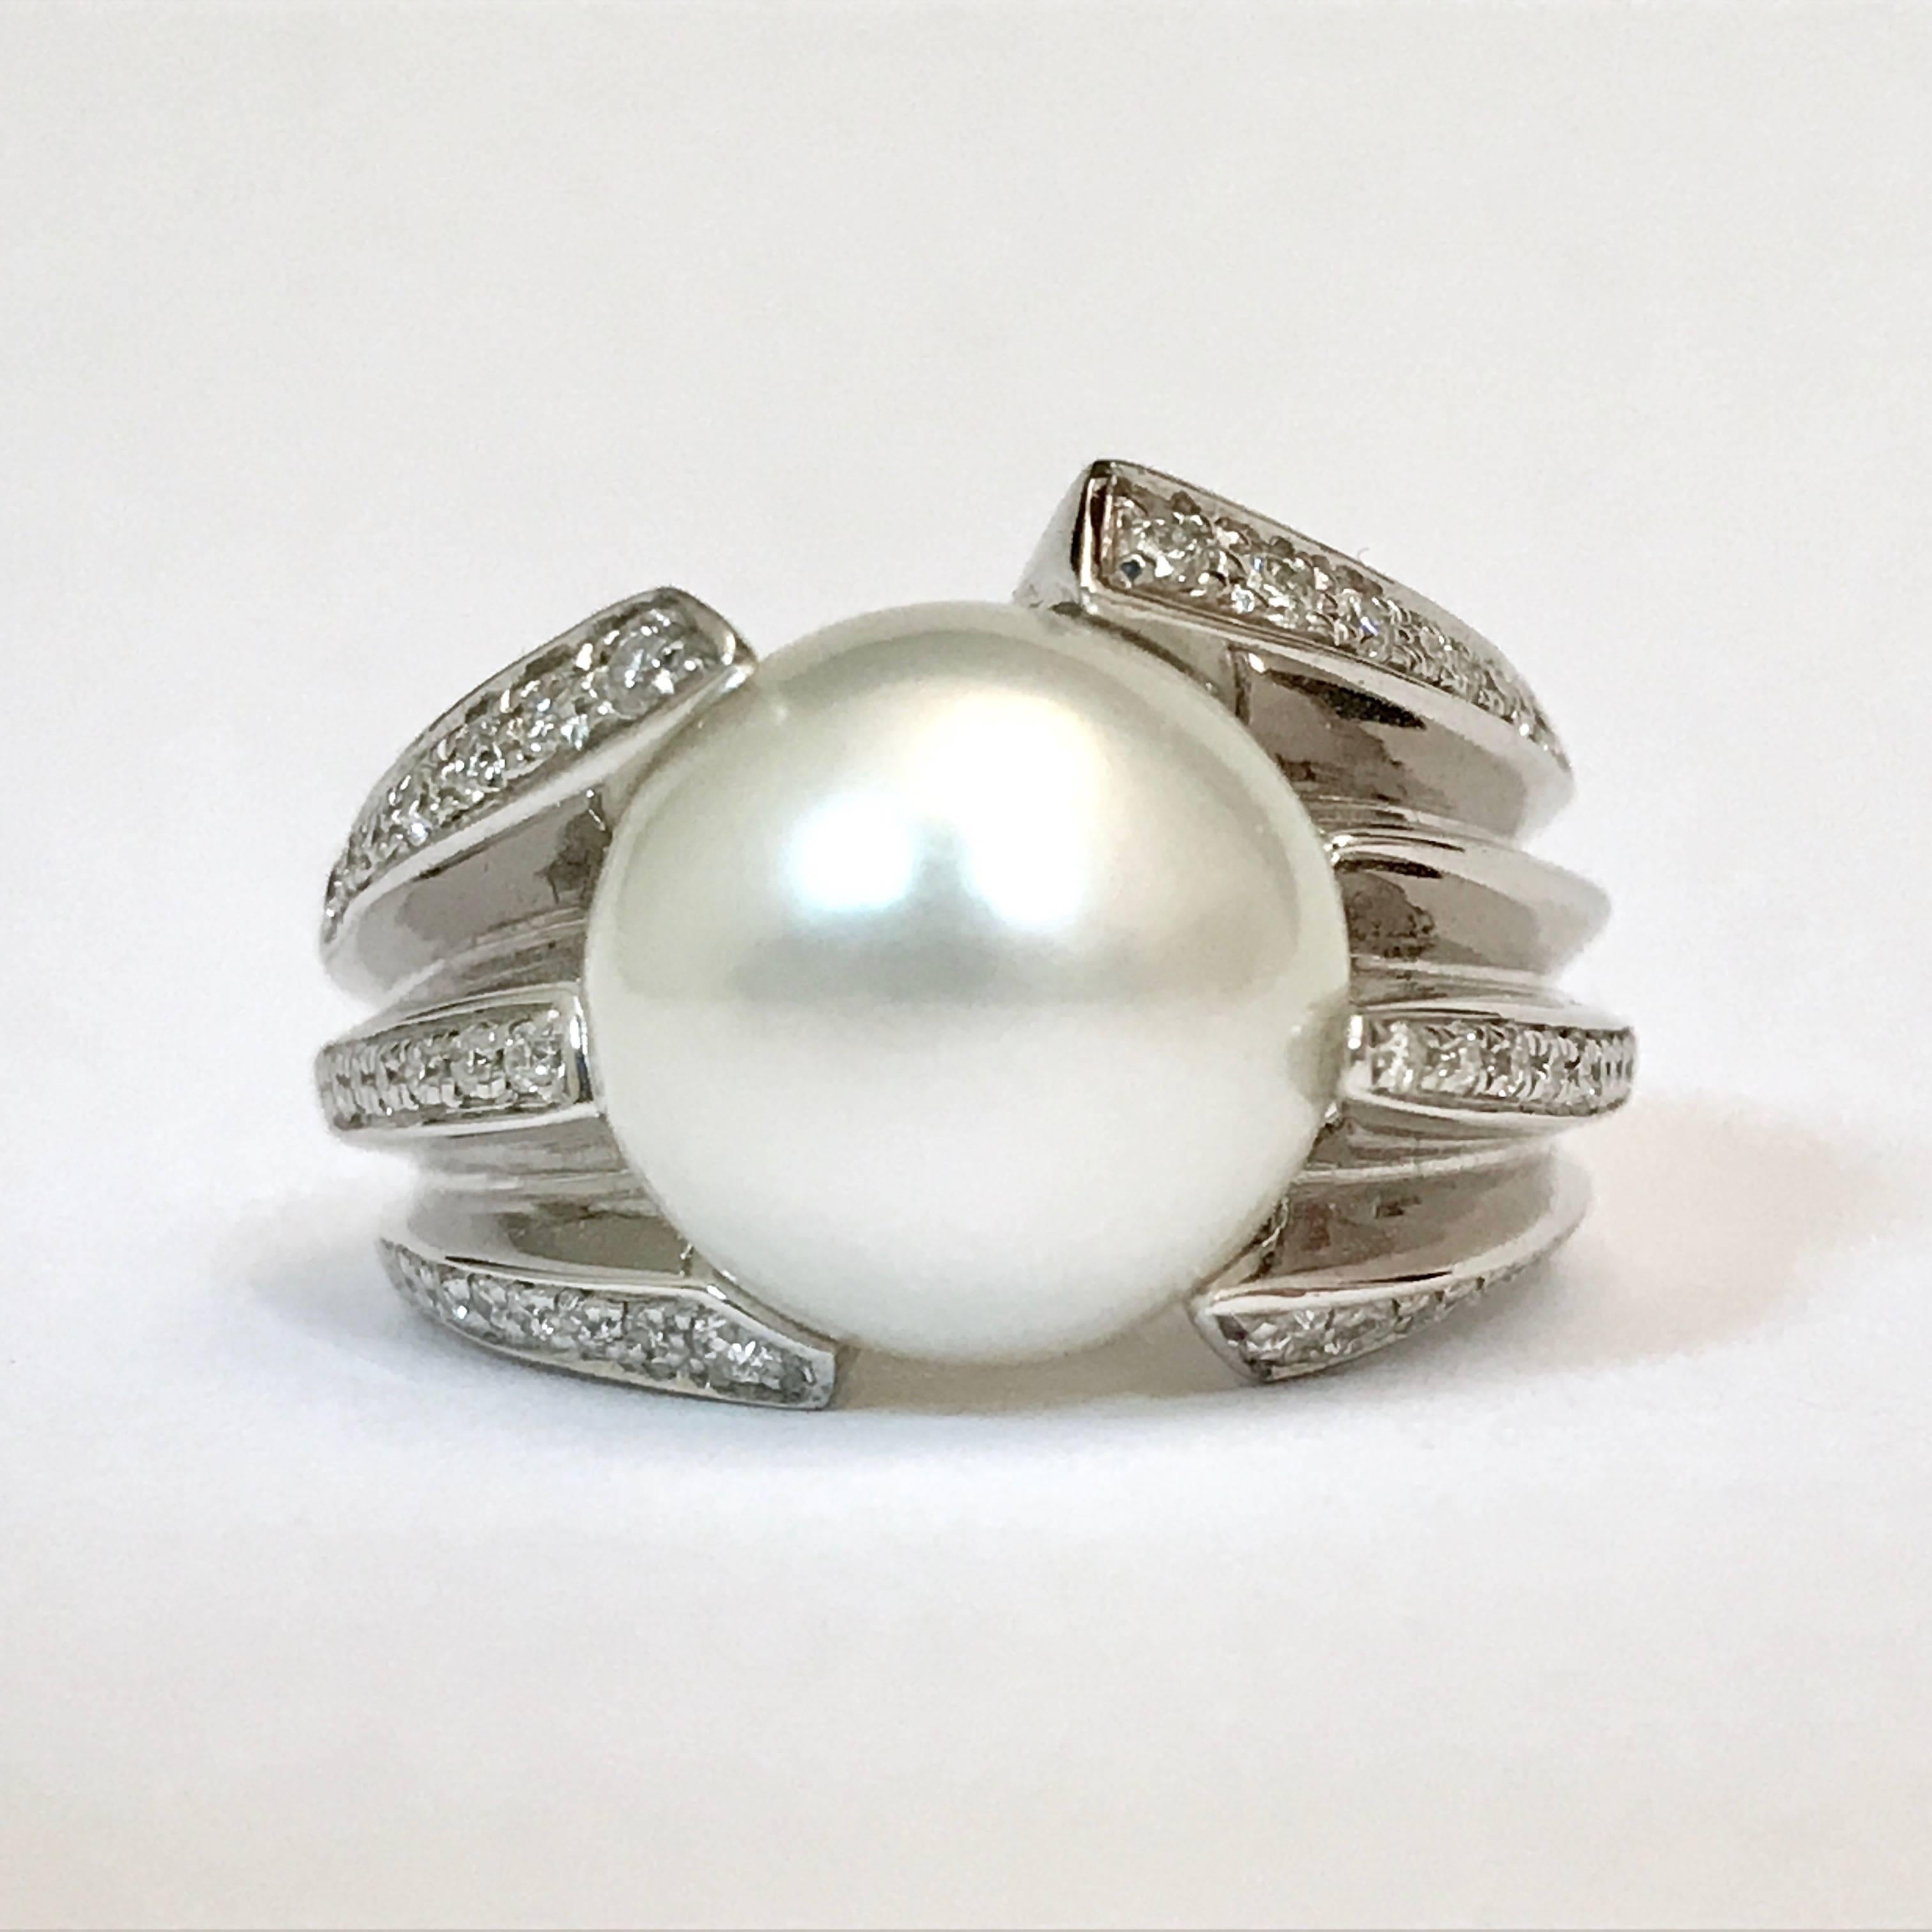 Admire the timeless elegance of this exceptional ring in cultured pearls and white diamonds. Carefully crafted in 18-carat white gold, this exquisite piece embodies the perfect marriage of classic sophistication and contemporary style.

At the